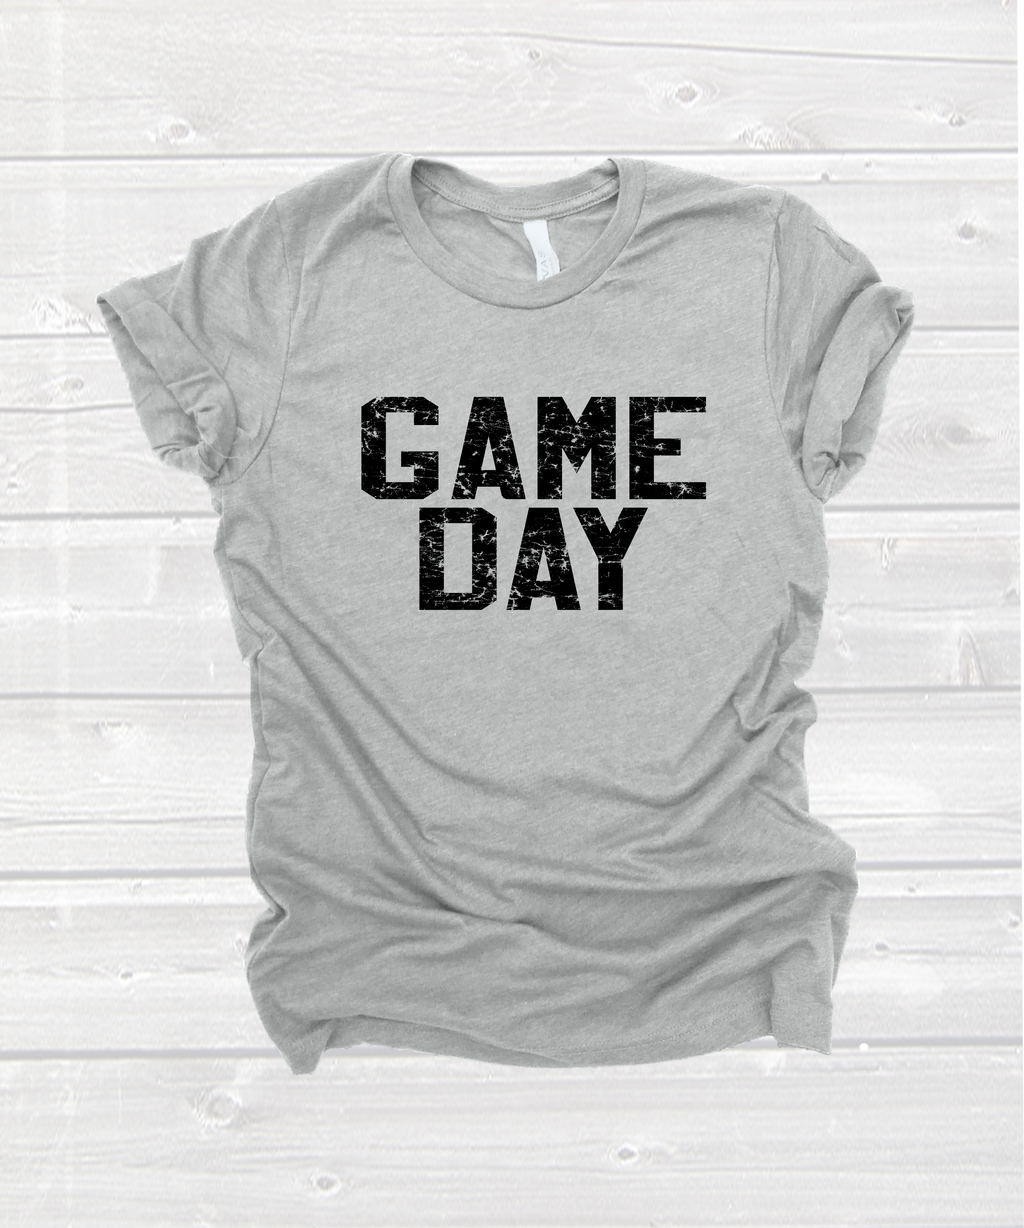 varsity "game day" tee with black print in red, white and light grey